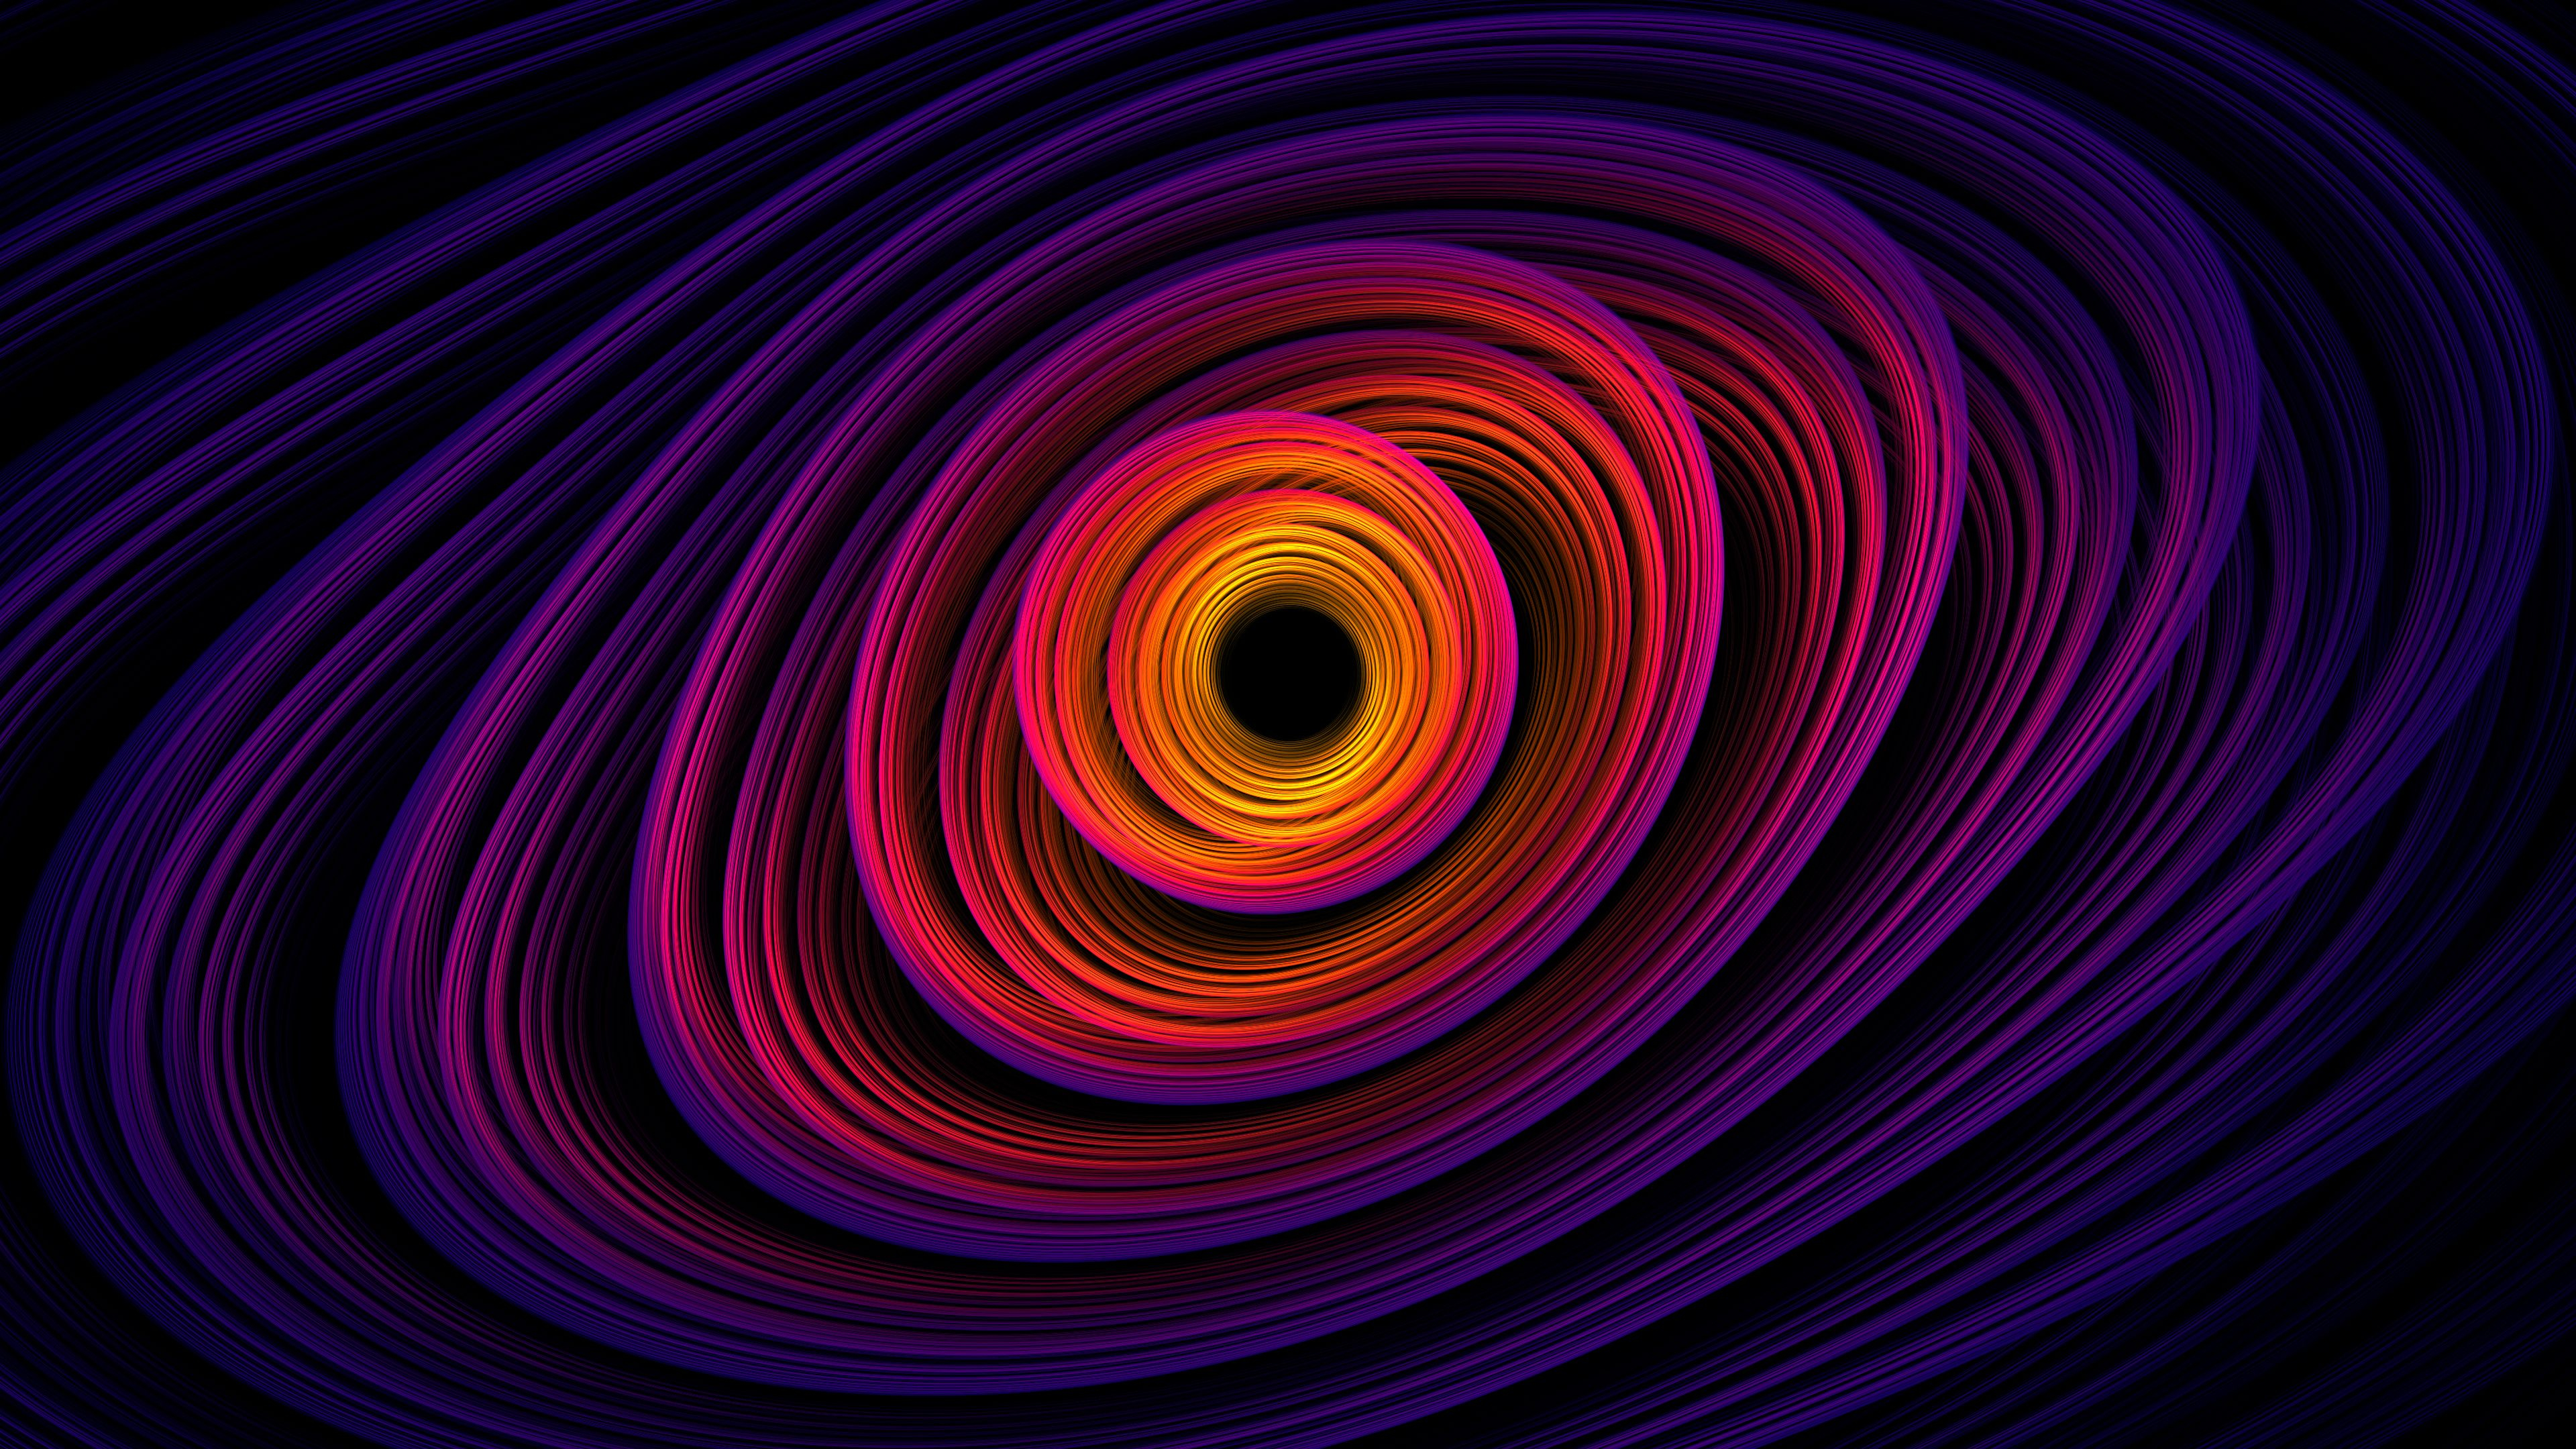 3840x2160 Spiral Shapes Abstract 4k spiral wallpapers, hd-wallpapers, digital art wallpapers, abstract wallpapers, 4k-&acirc;&#128;&brvbar; | Abstract, Abstract wallpaper, Abstract art wallpaper